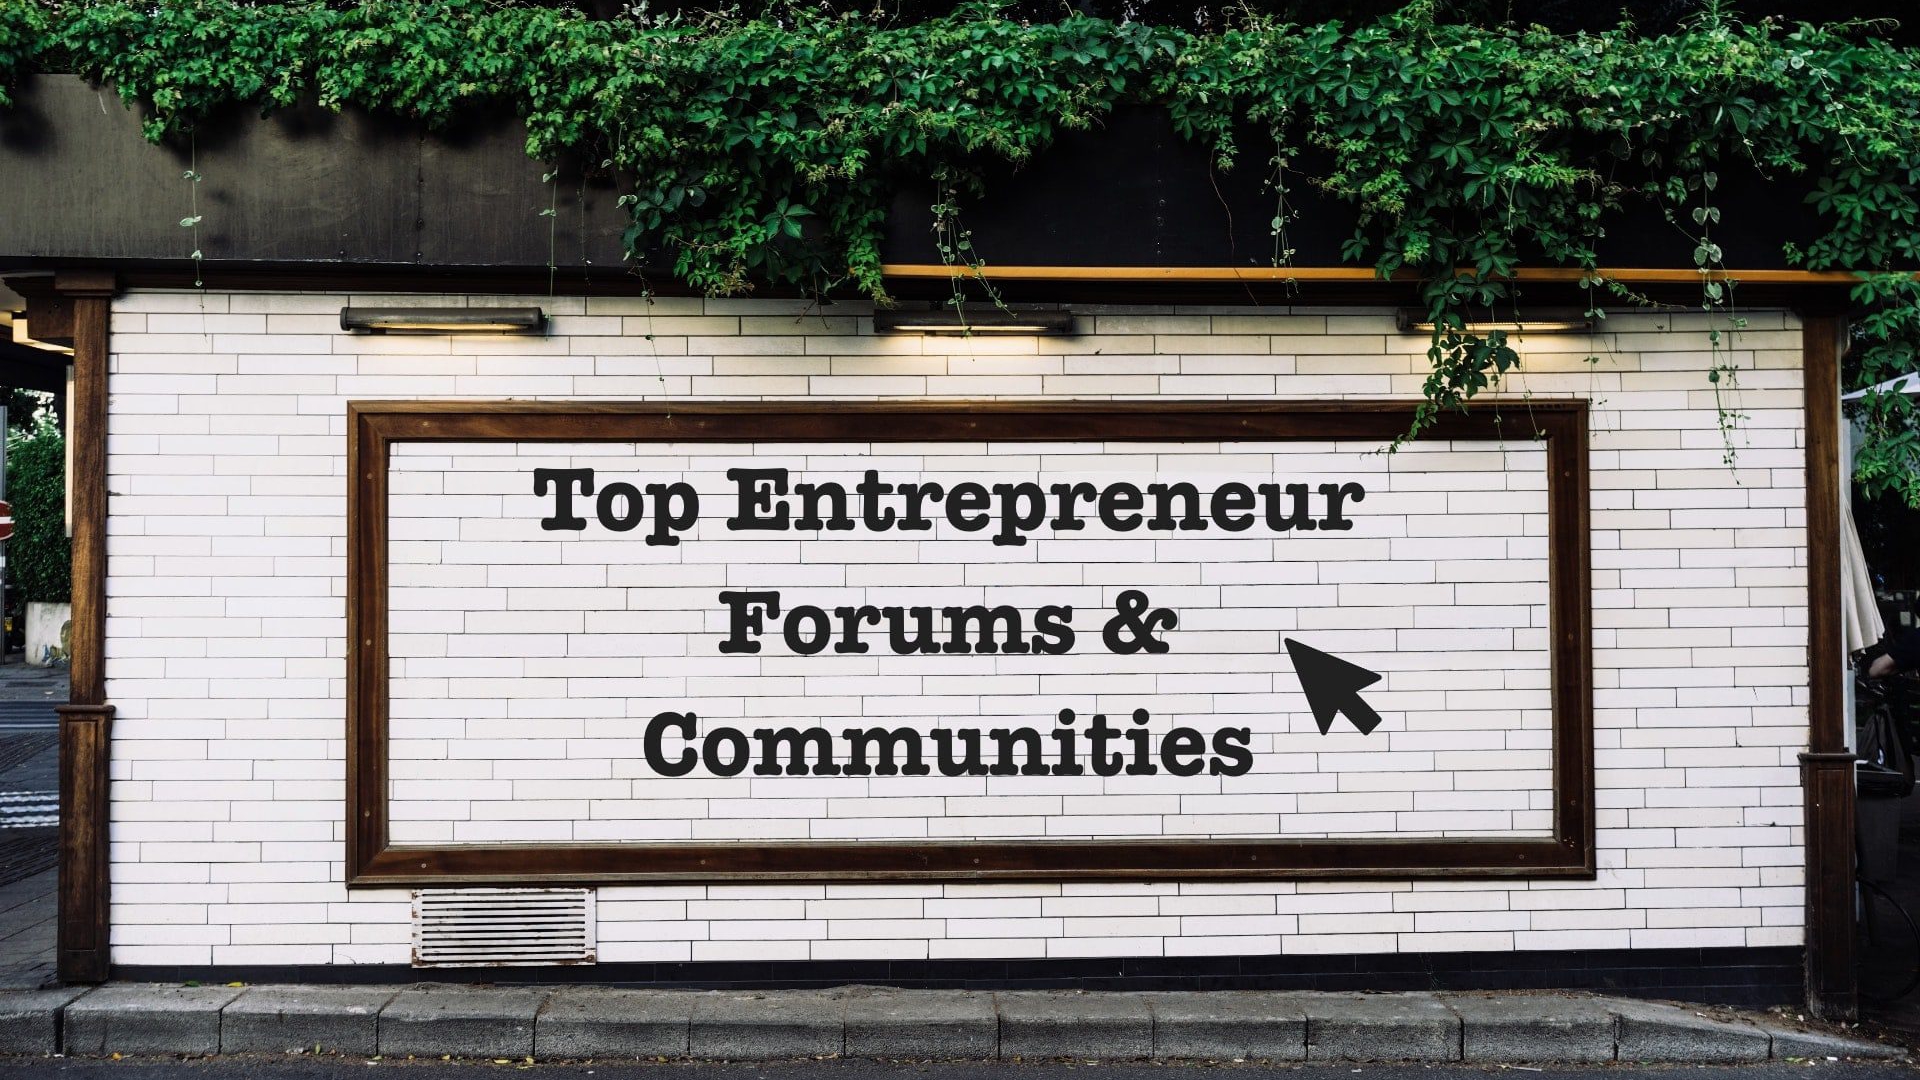 Top online entrepreneur forums - image of small business owners looking at a motivational sign that says 